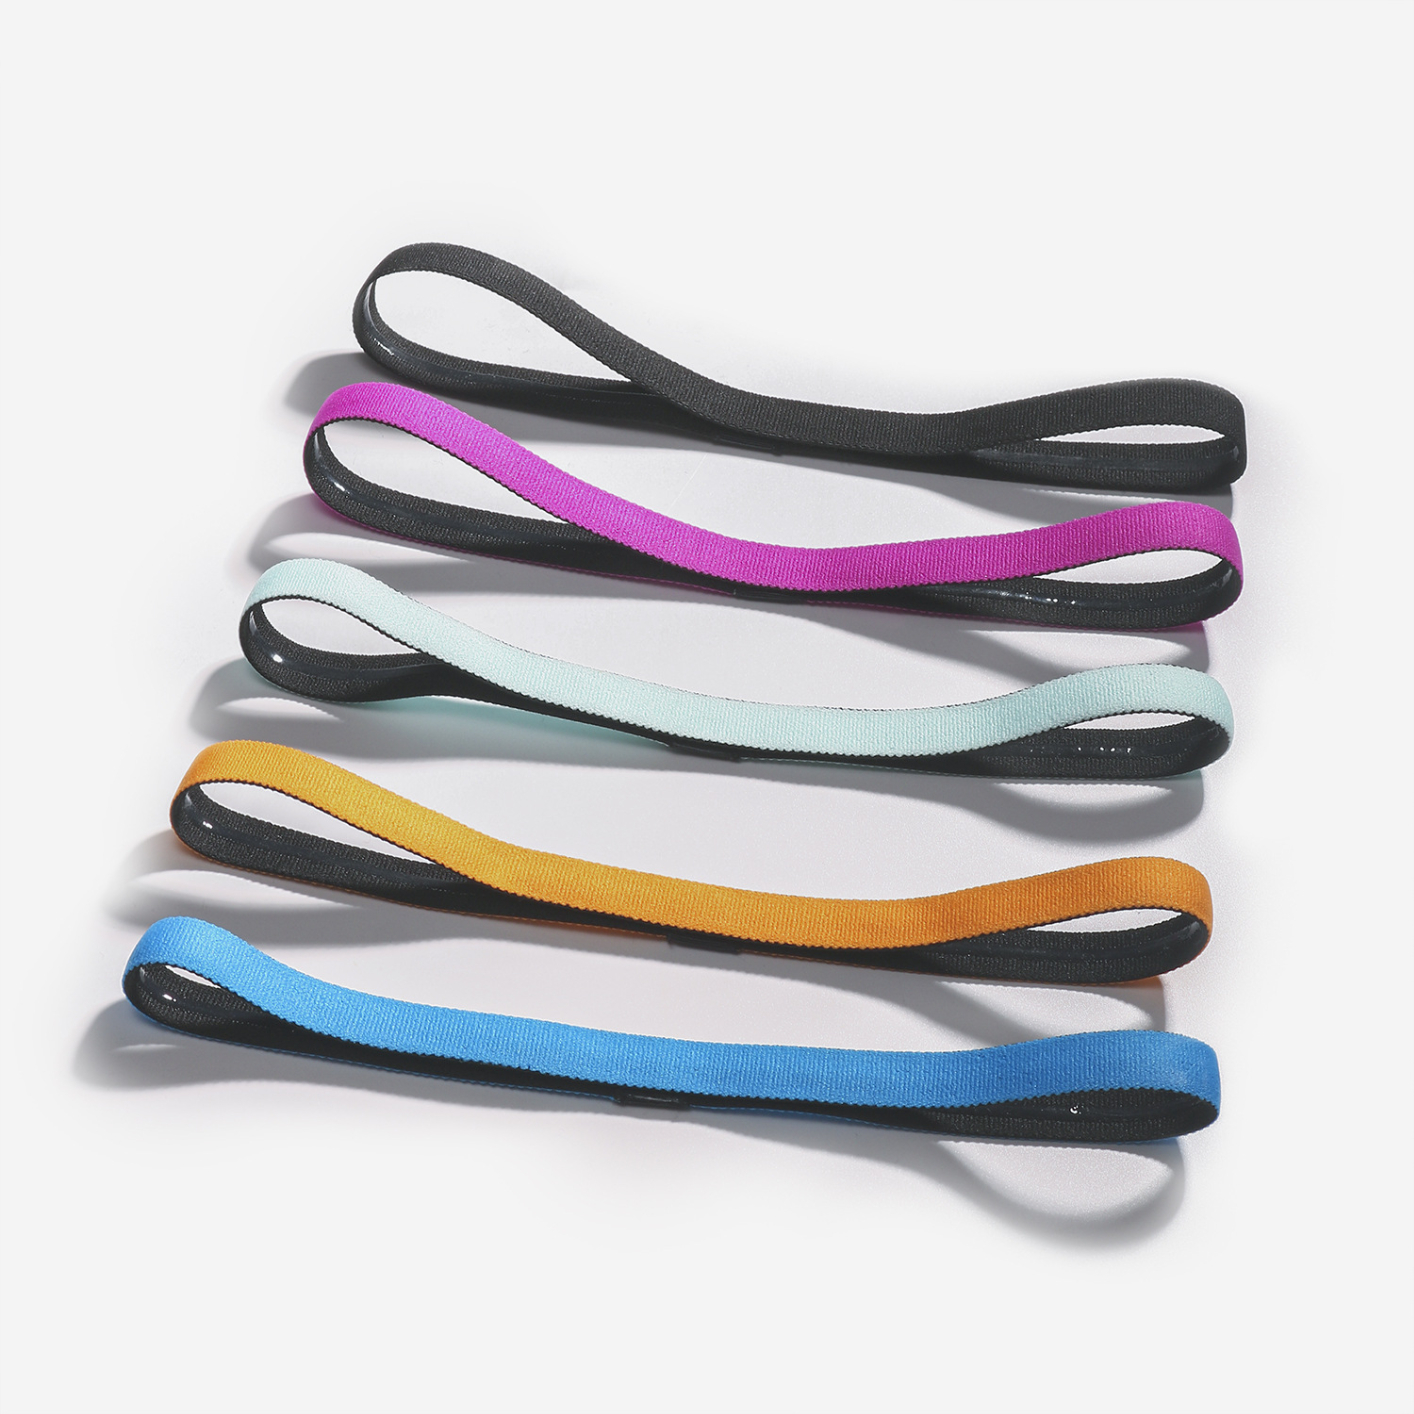 HT010 Elastic Thin Sports Headbands - Athletic Non Slip Skinny Headbands for Women Men Boys Girls Kids Silicone Grip Hairband Mini Sweat Band, Great for Workouts